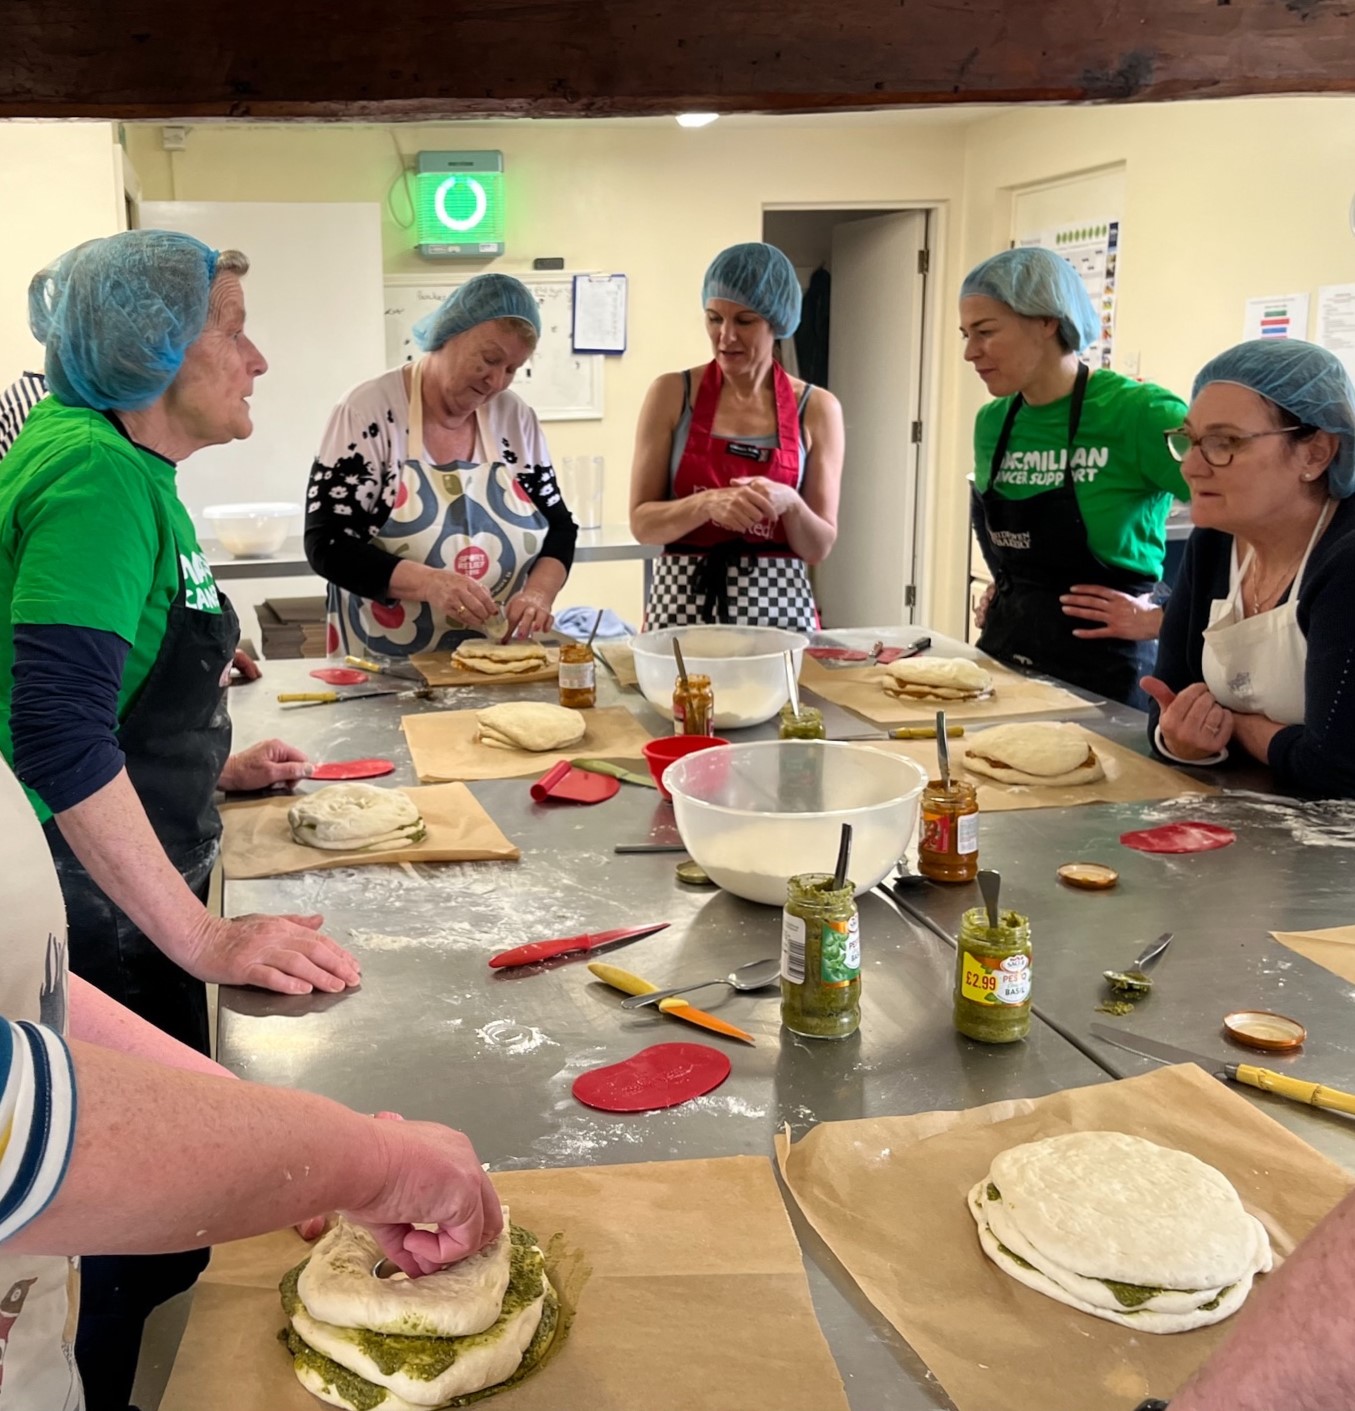 Make A Loaf For Macmillan Breadmaking Course For Macmillan Cancer Support